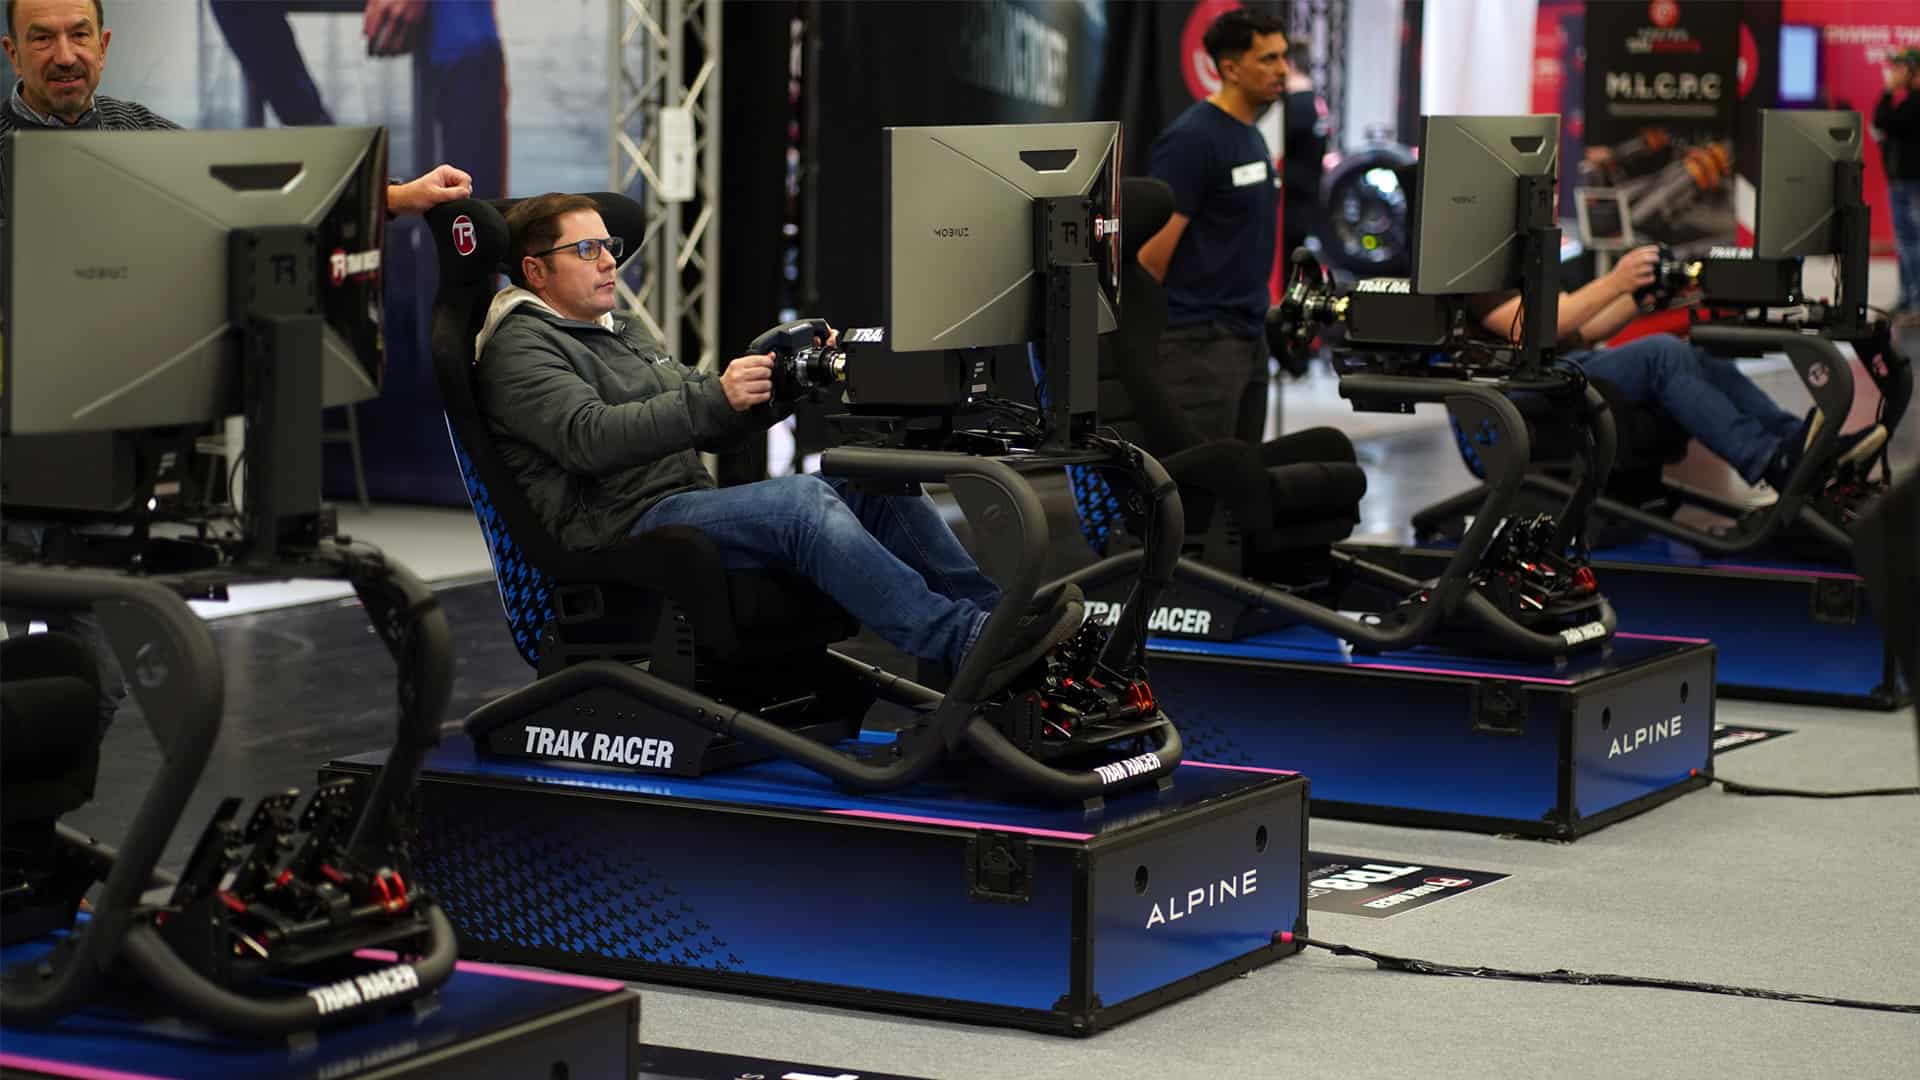 http://traxion.gg/wp-content/uploads/2023/02/ADAC-SimRacing-Expo-returns-in-2023-moves-to-Dortmund.jpg